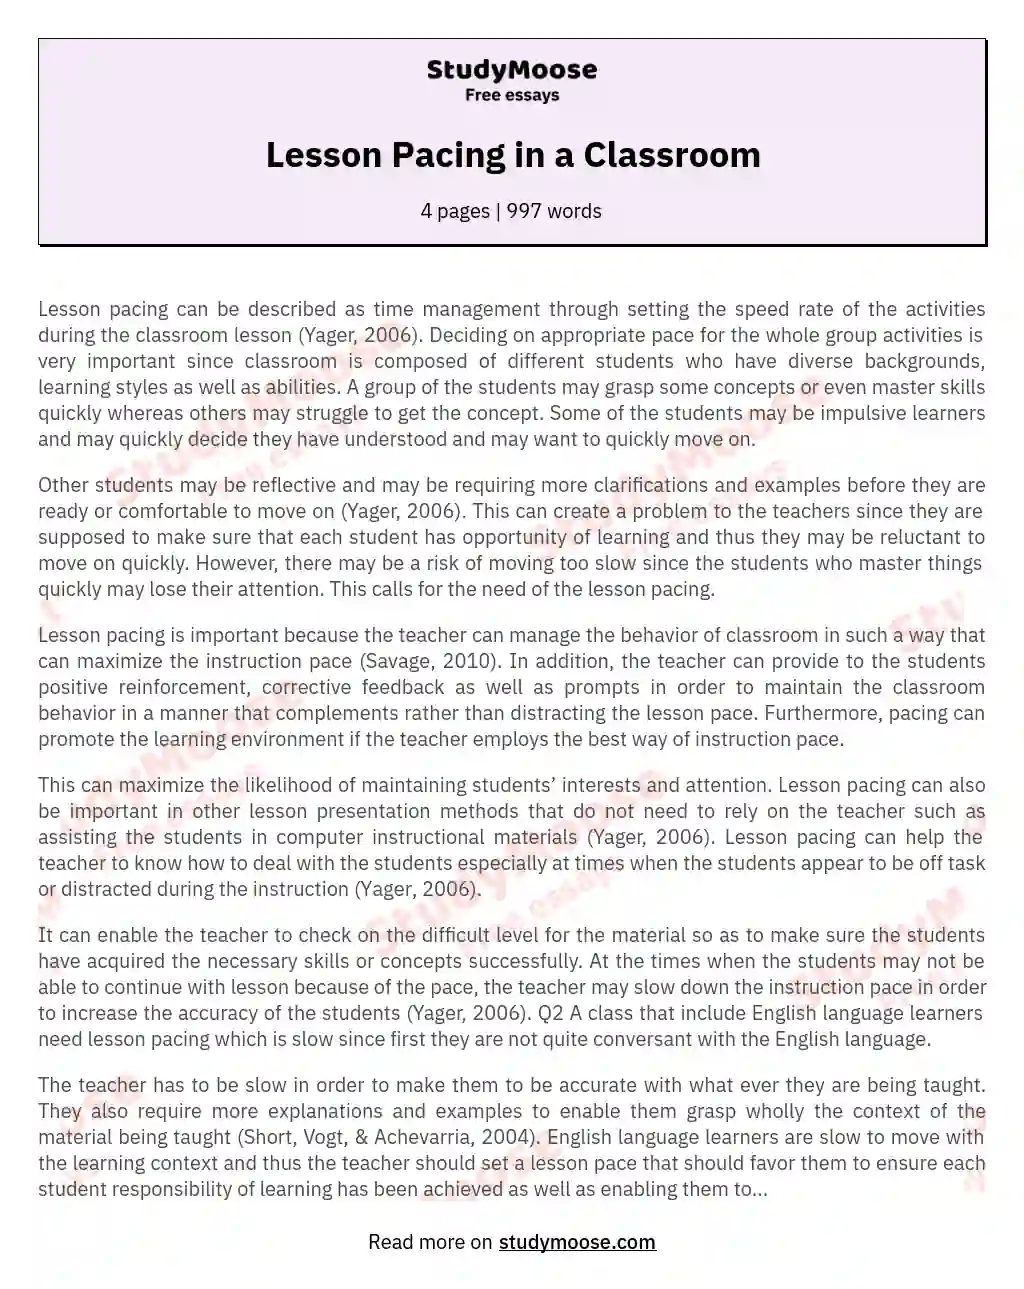 Lesson Pacing in a Classroom essay